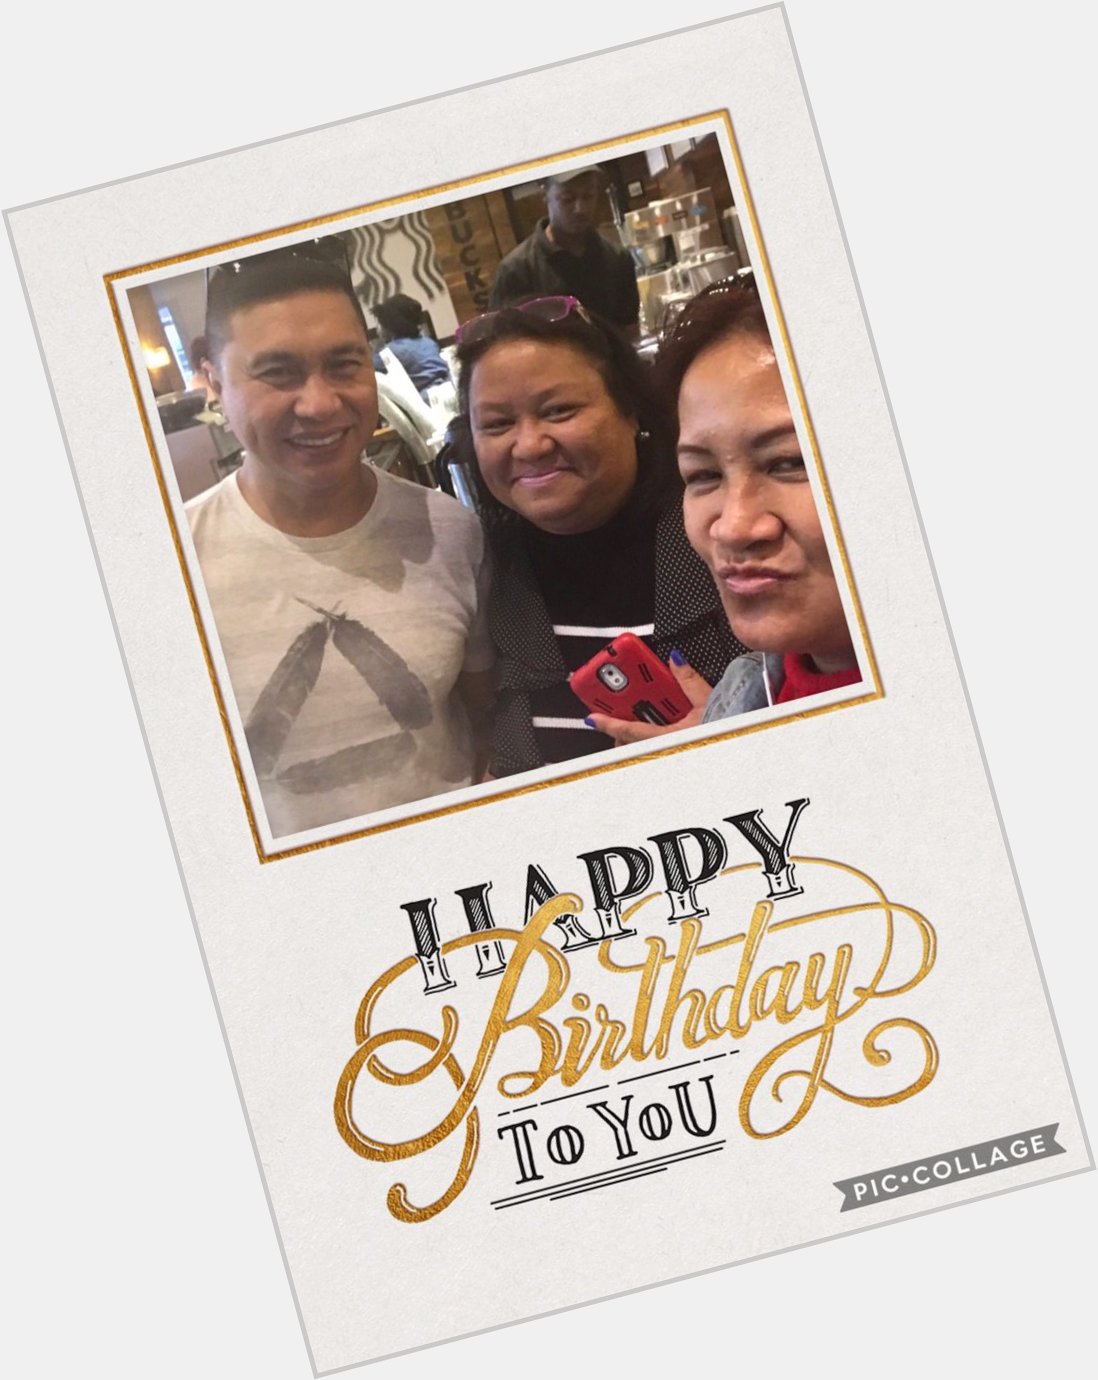 From New York and Texas here s wishing you a very happy birthday Mr Jose Manalo    